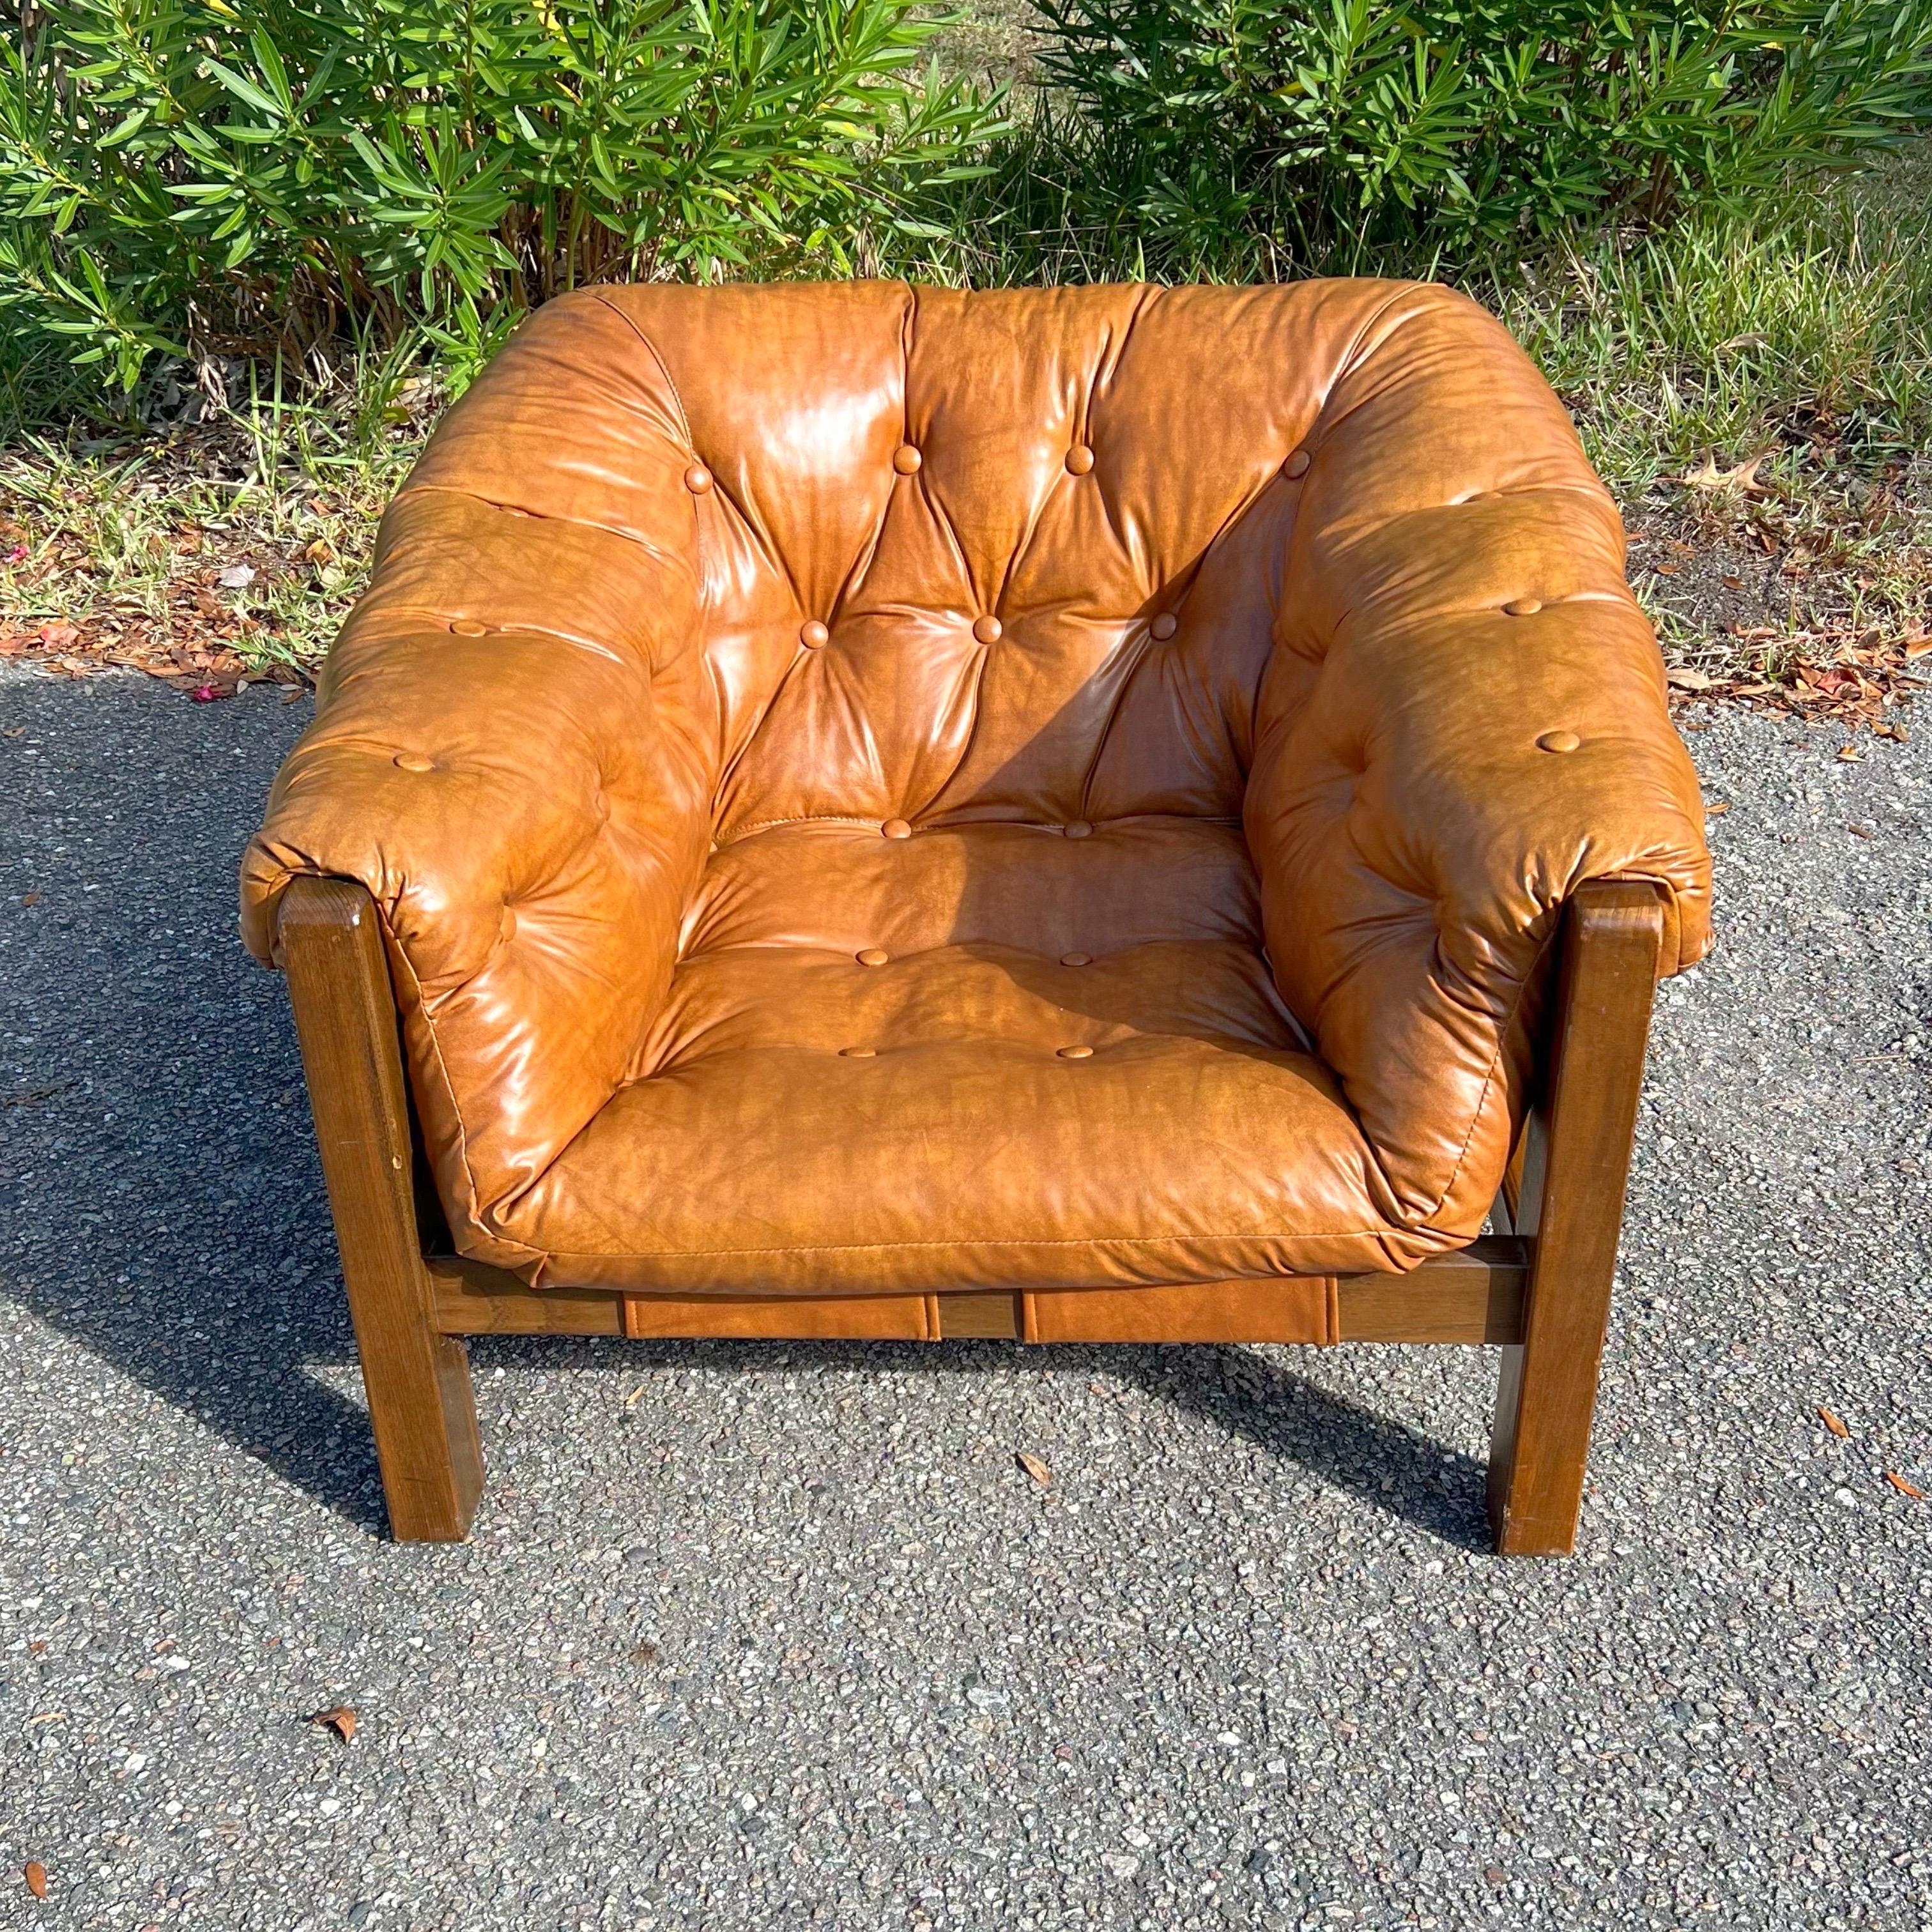 Stunning leather armchair in manner of Brazilian designer Percival Lafer.  Featuring a solid wood frame with beautiful grain that supports the natural leather straps which the tufted leather cushion rests on.  The original leather upholstery in very